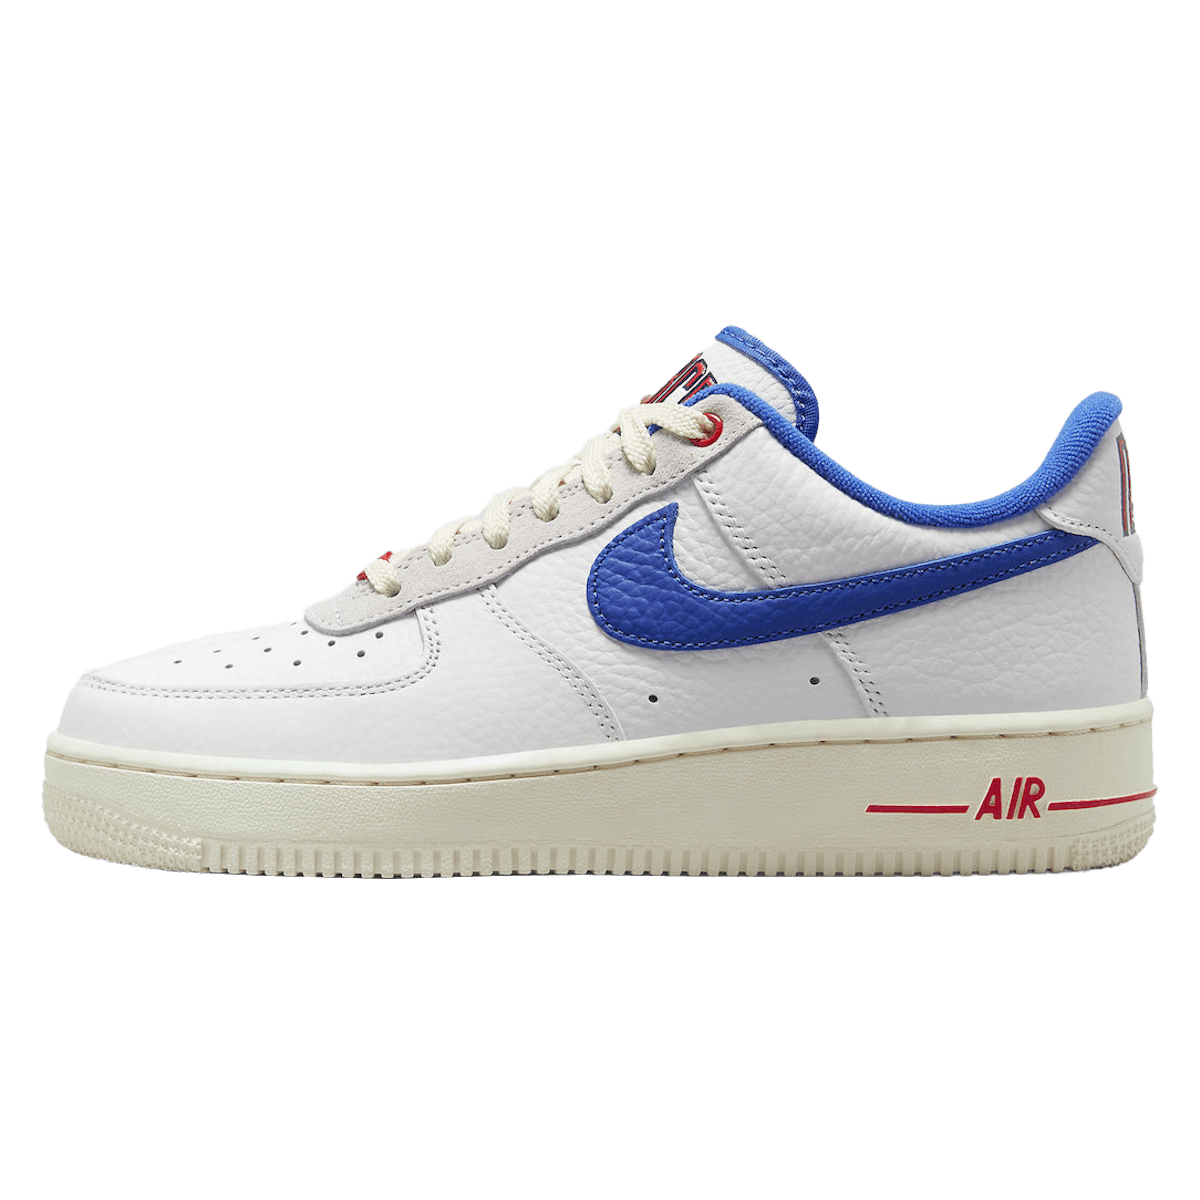 Nike Air Force 1 Low LX "Command Force"